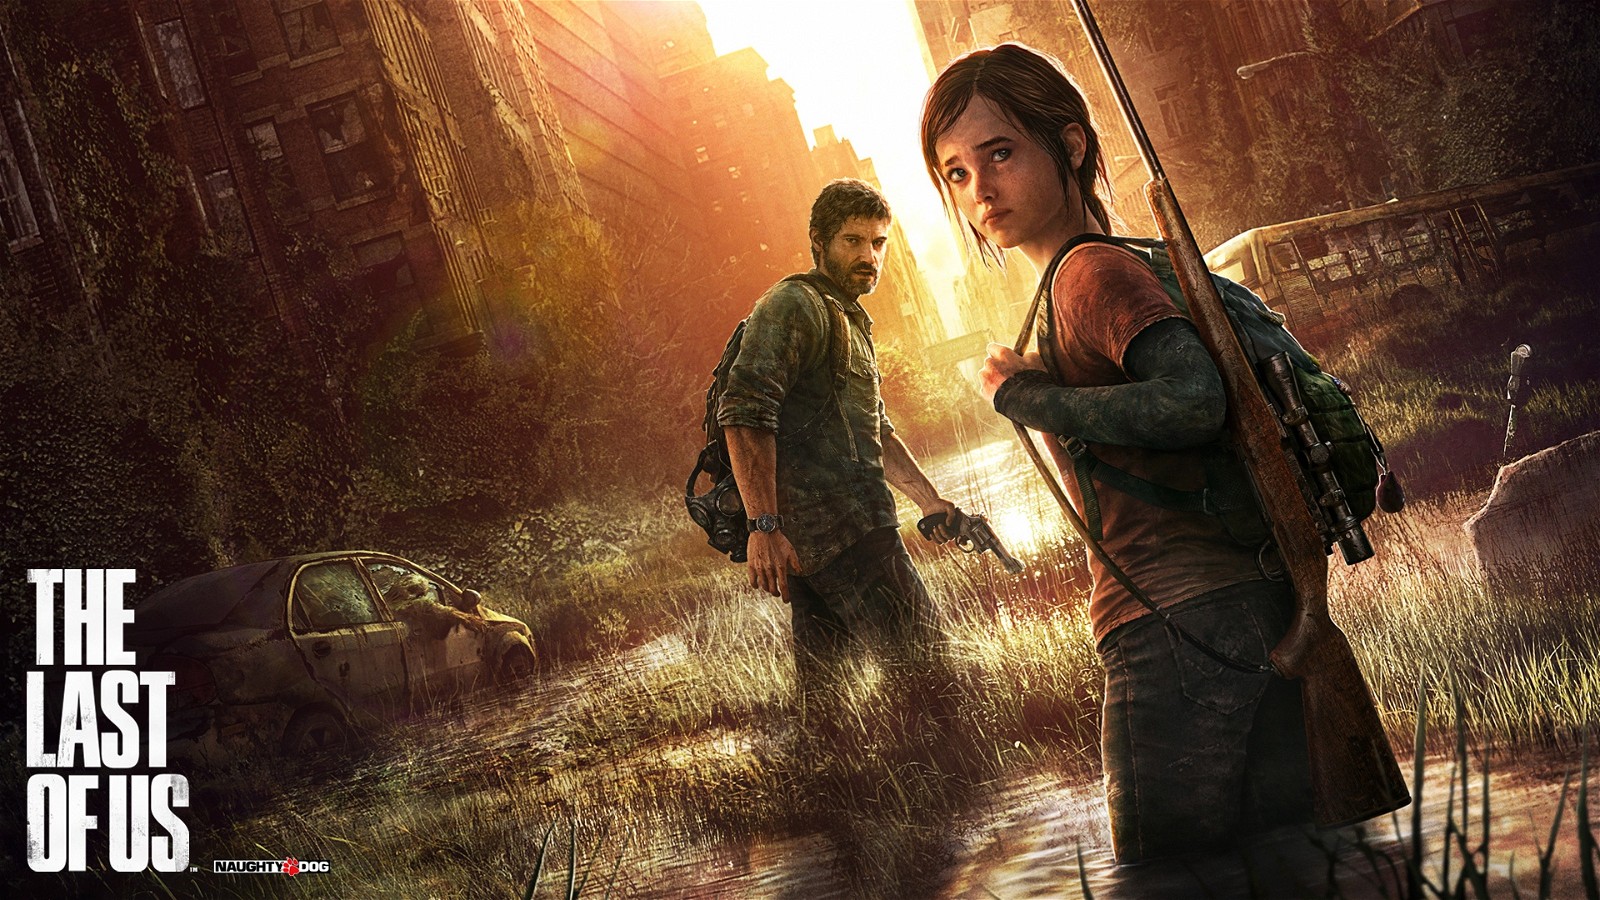 Naughty Dog's The Last of Us